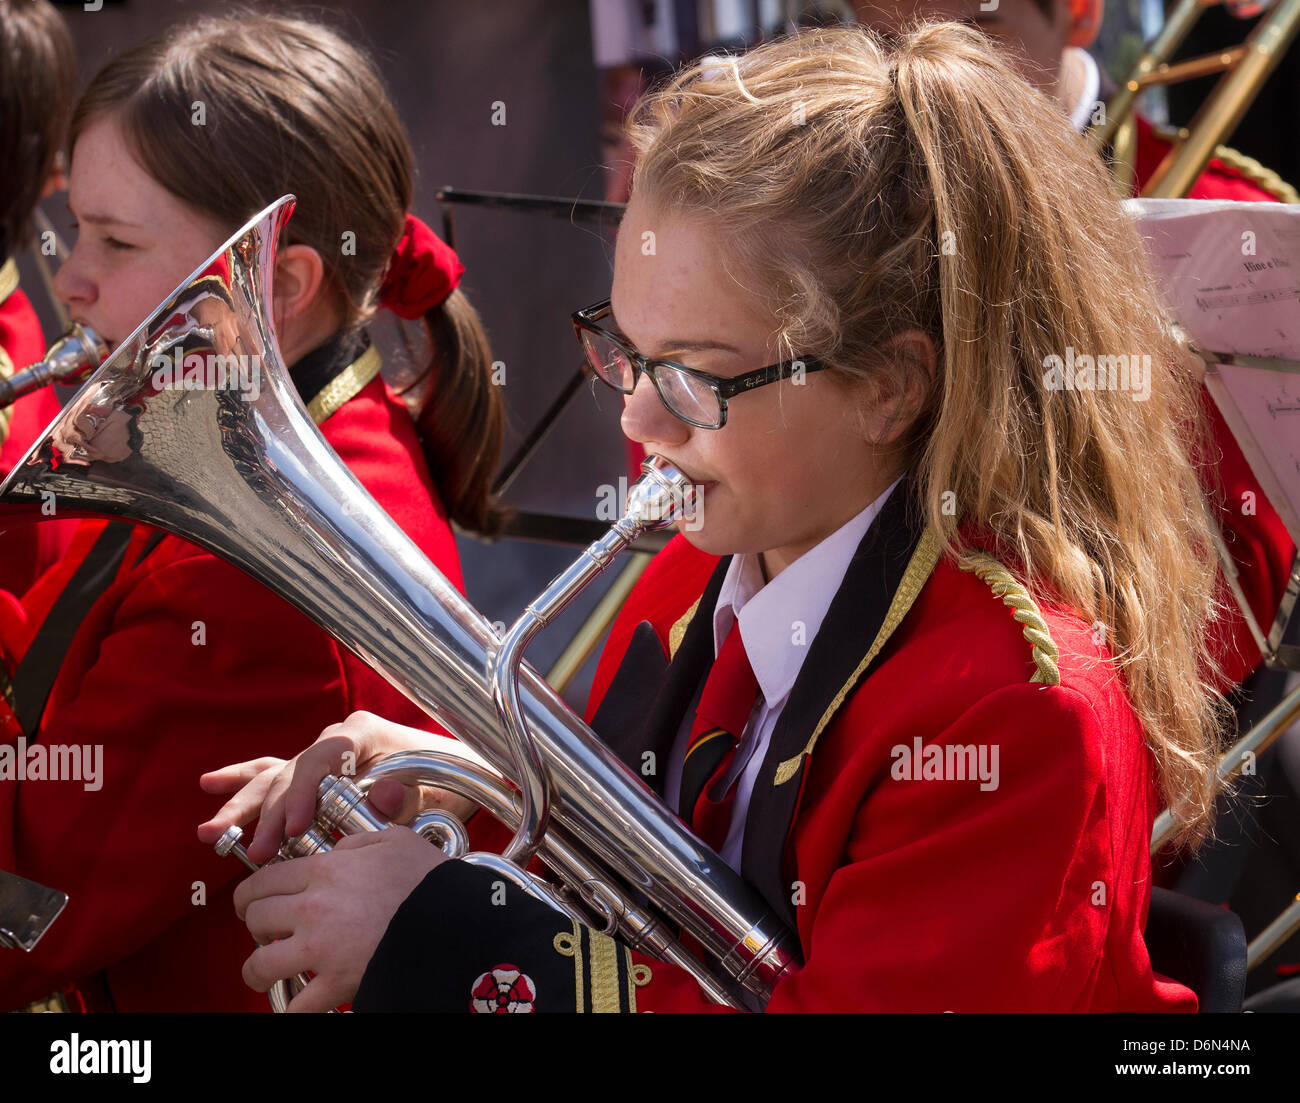 Manchester, UK. 20th April, 2013. Young female musicians of the Dobcross Orchestra Youth Band play at the St George's day celebrations, a group event held in Albert Square and Piccadilly, an extension of the annual St George Parade to celebrate England's Patron Saint, with many musical performers various instruments and entertainers playing. Stock Photo